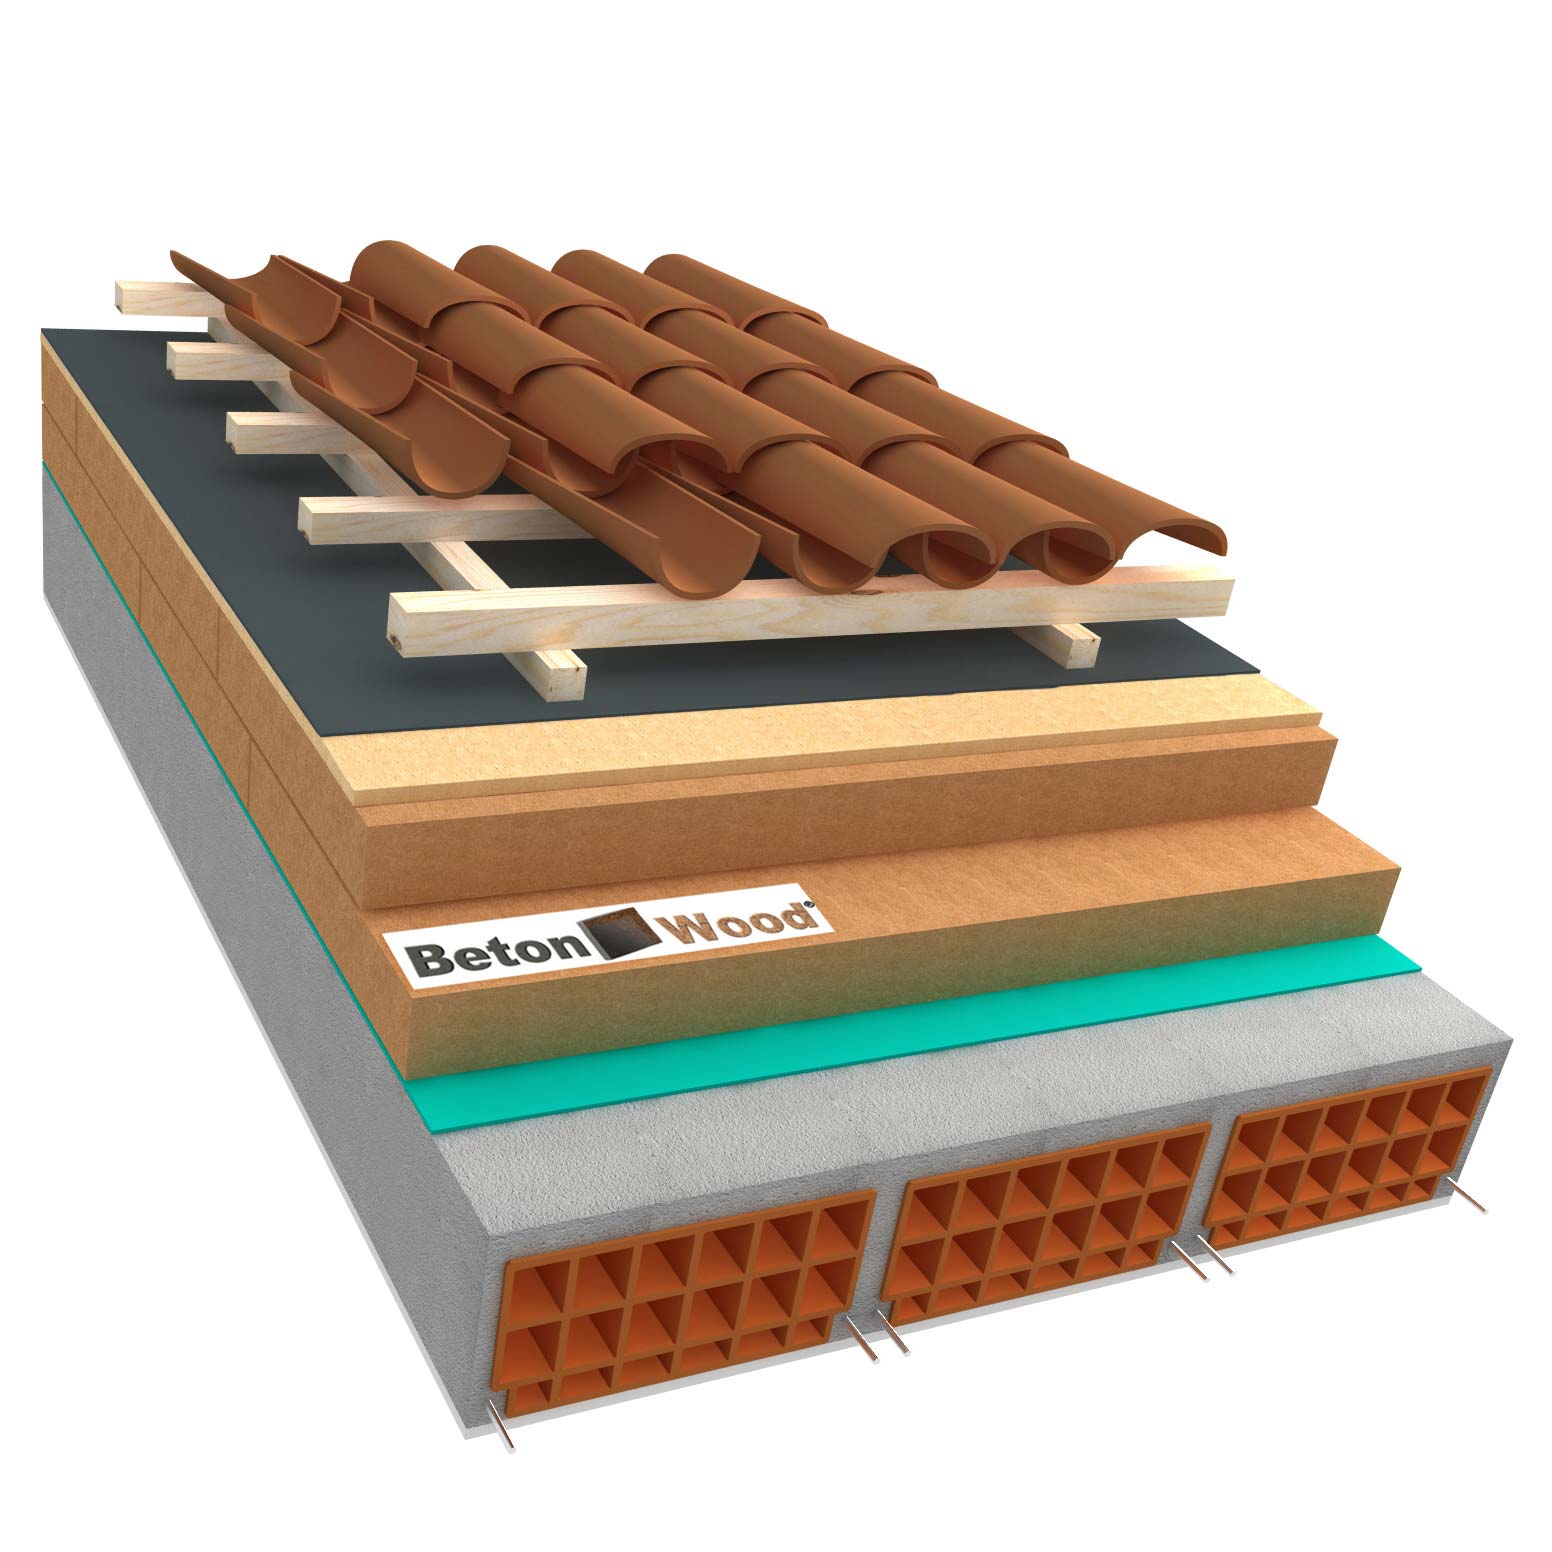 Ventilated roof with fiber wood Isorel and Universal on concrete